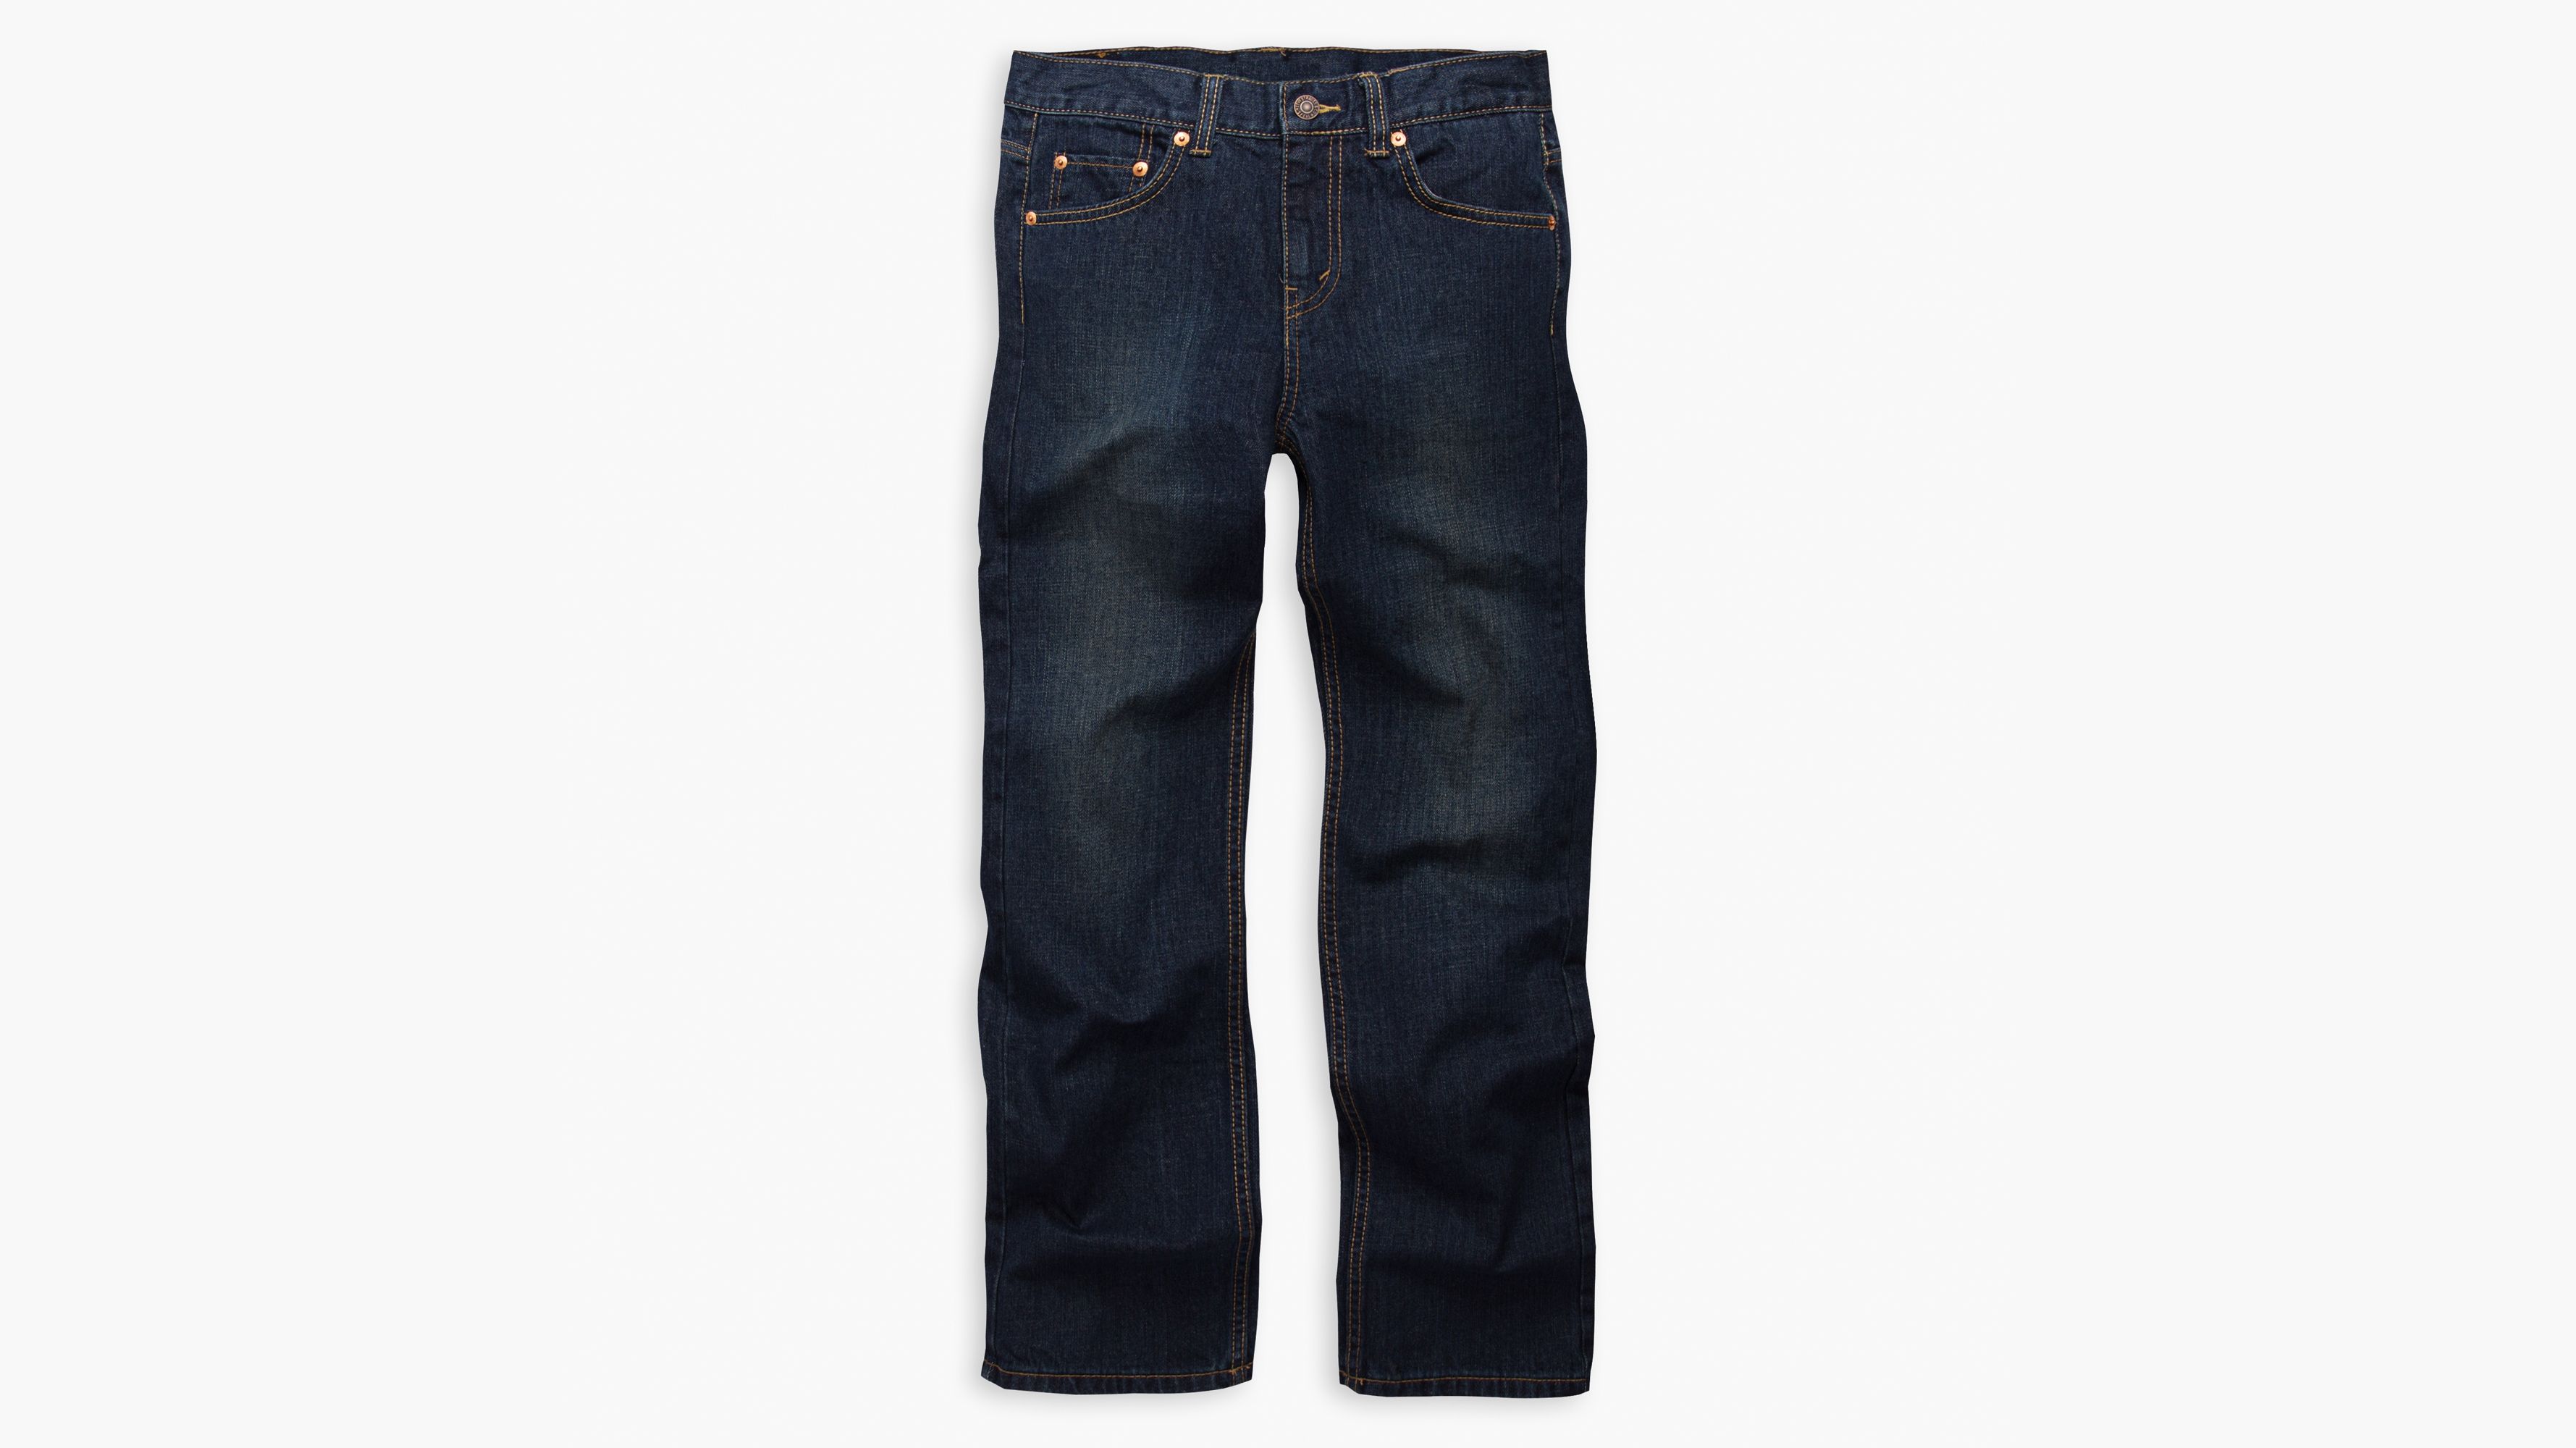 550™ Relaxed Fit Big Boys Jeans 8-20 - Medium Wash | Levi's® US